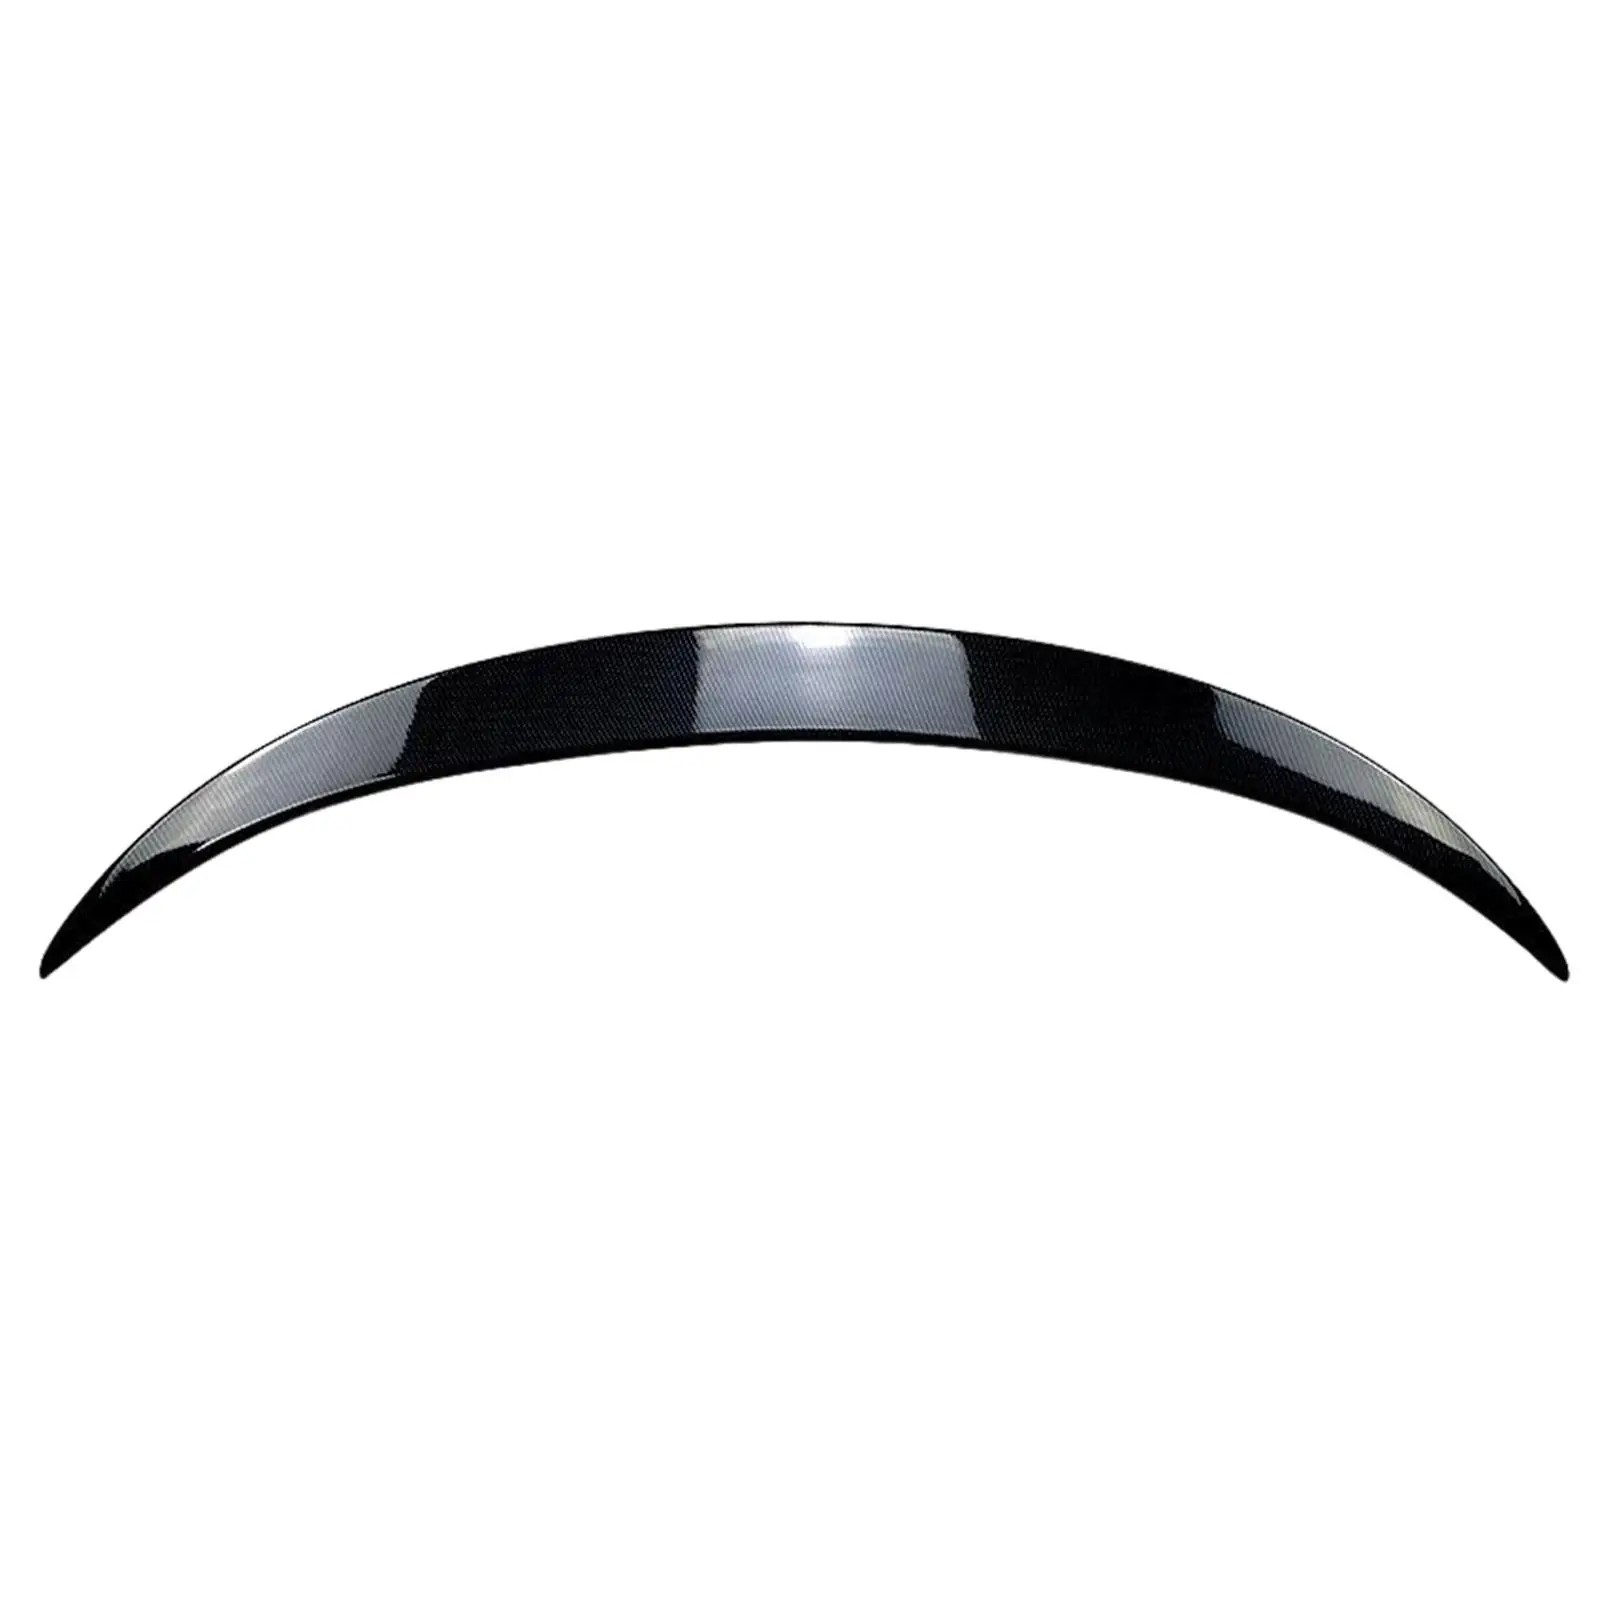 Car Rear Spoiler Wing Replaces Tail Wing Modification for C117 200 Spare Parts